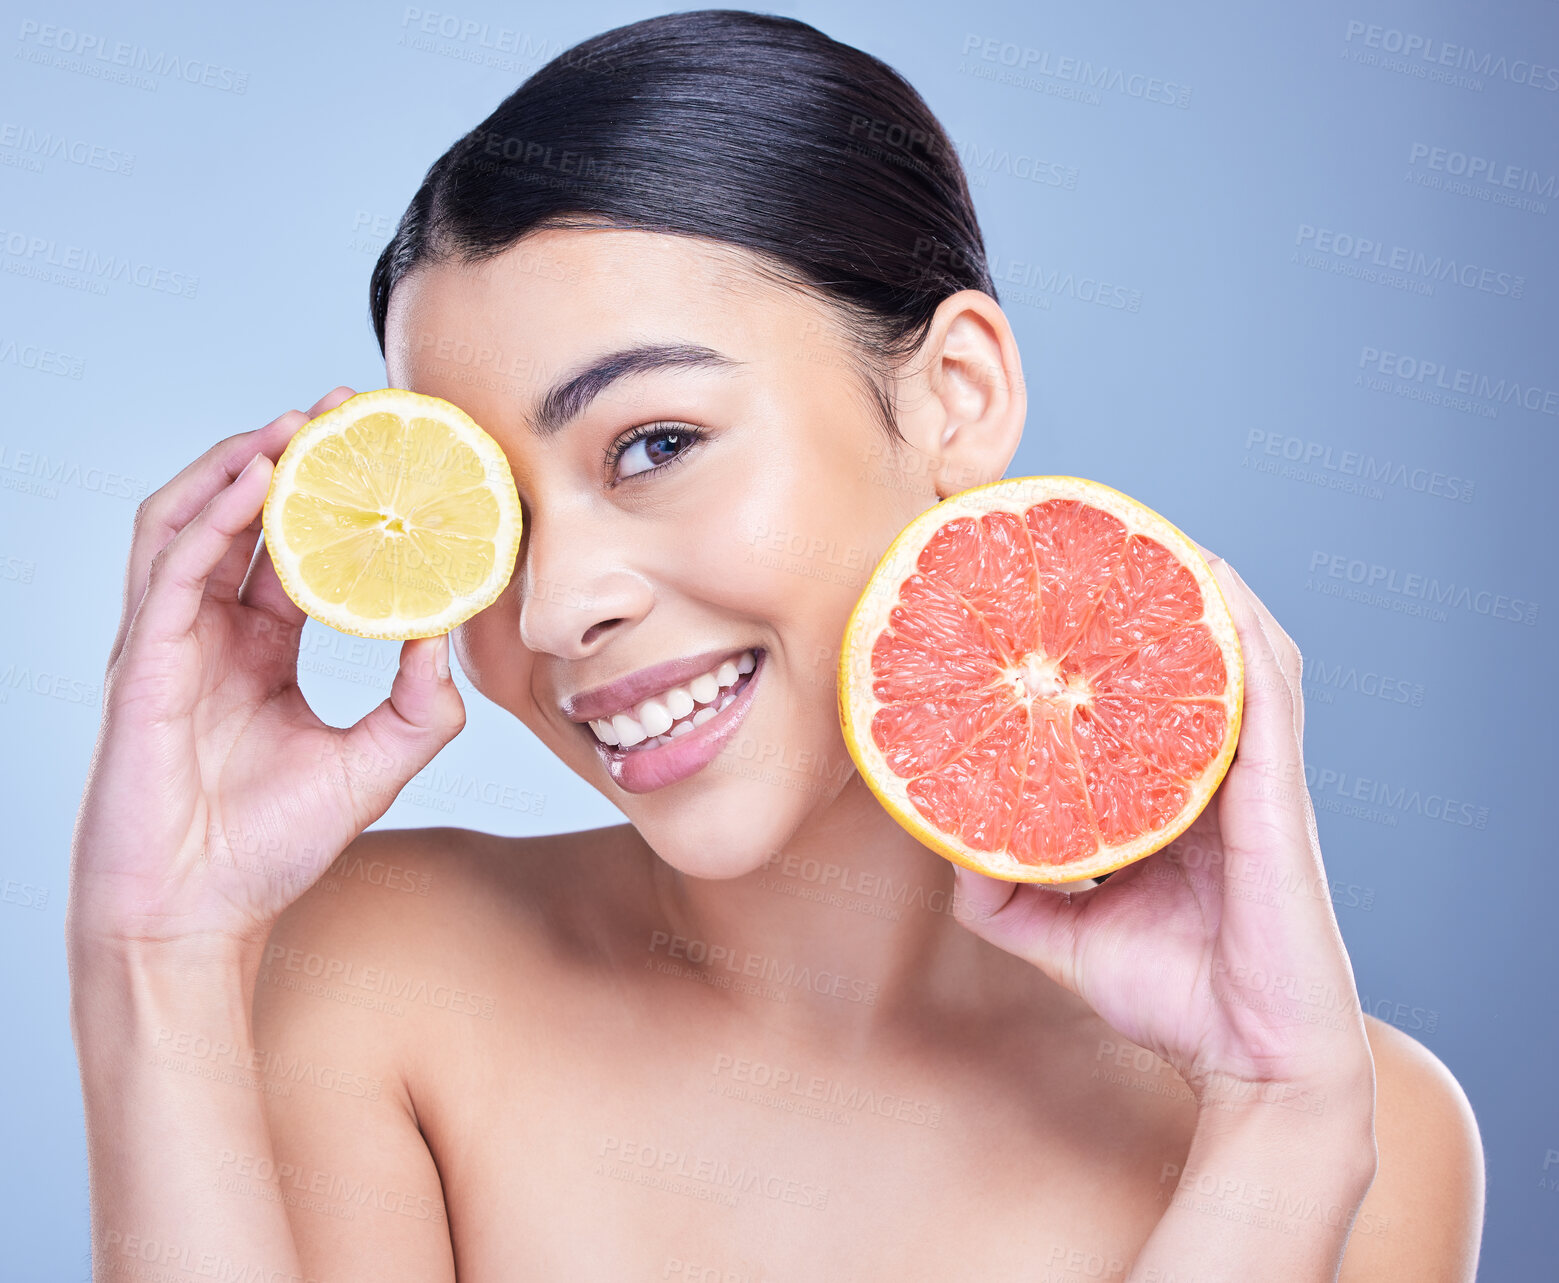 Buy stock photo Portrait of a happy mixed race woman holding a lemon and grapefruit. Hispanic model promoting the skin benefits of citrus against a blue copyspace background